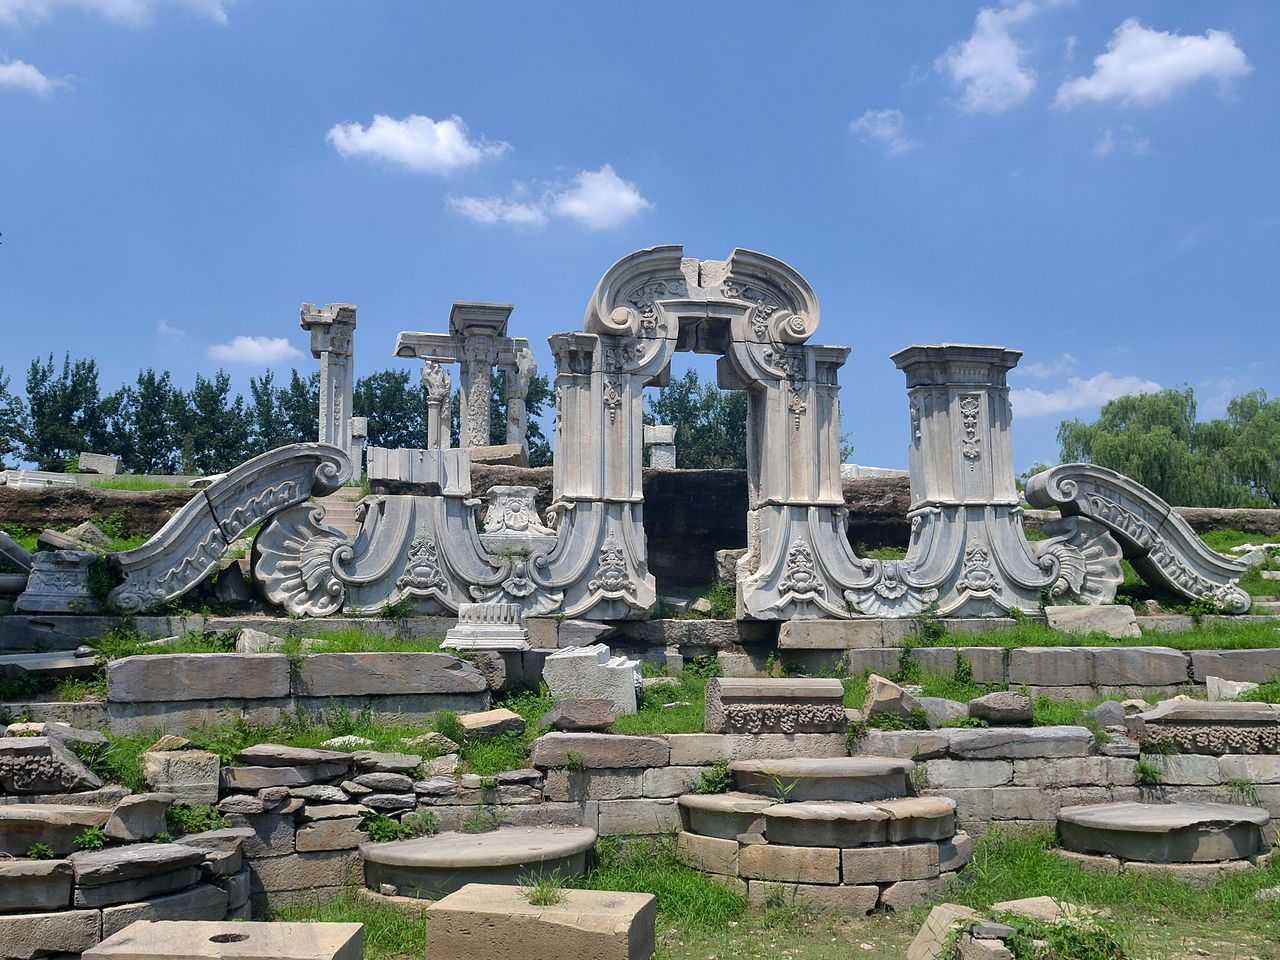 Ruins of the Old Summer Palace (圆明园) [Wikipedia]